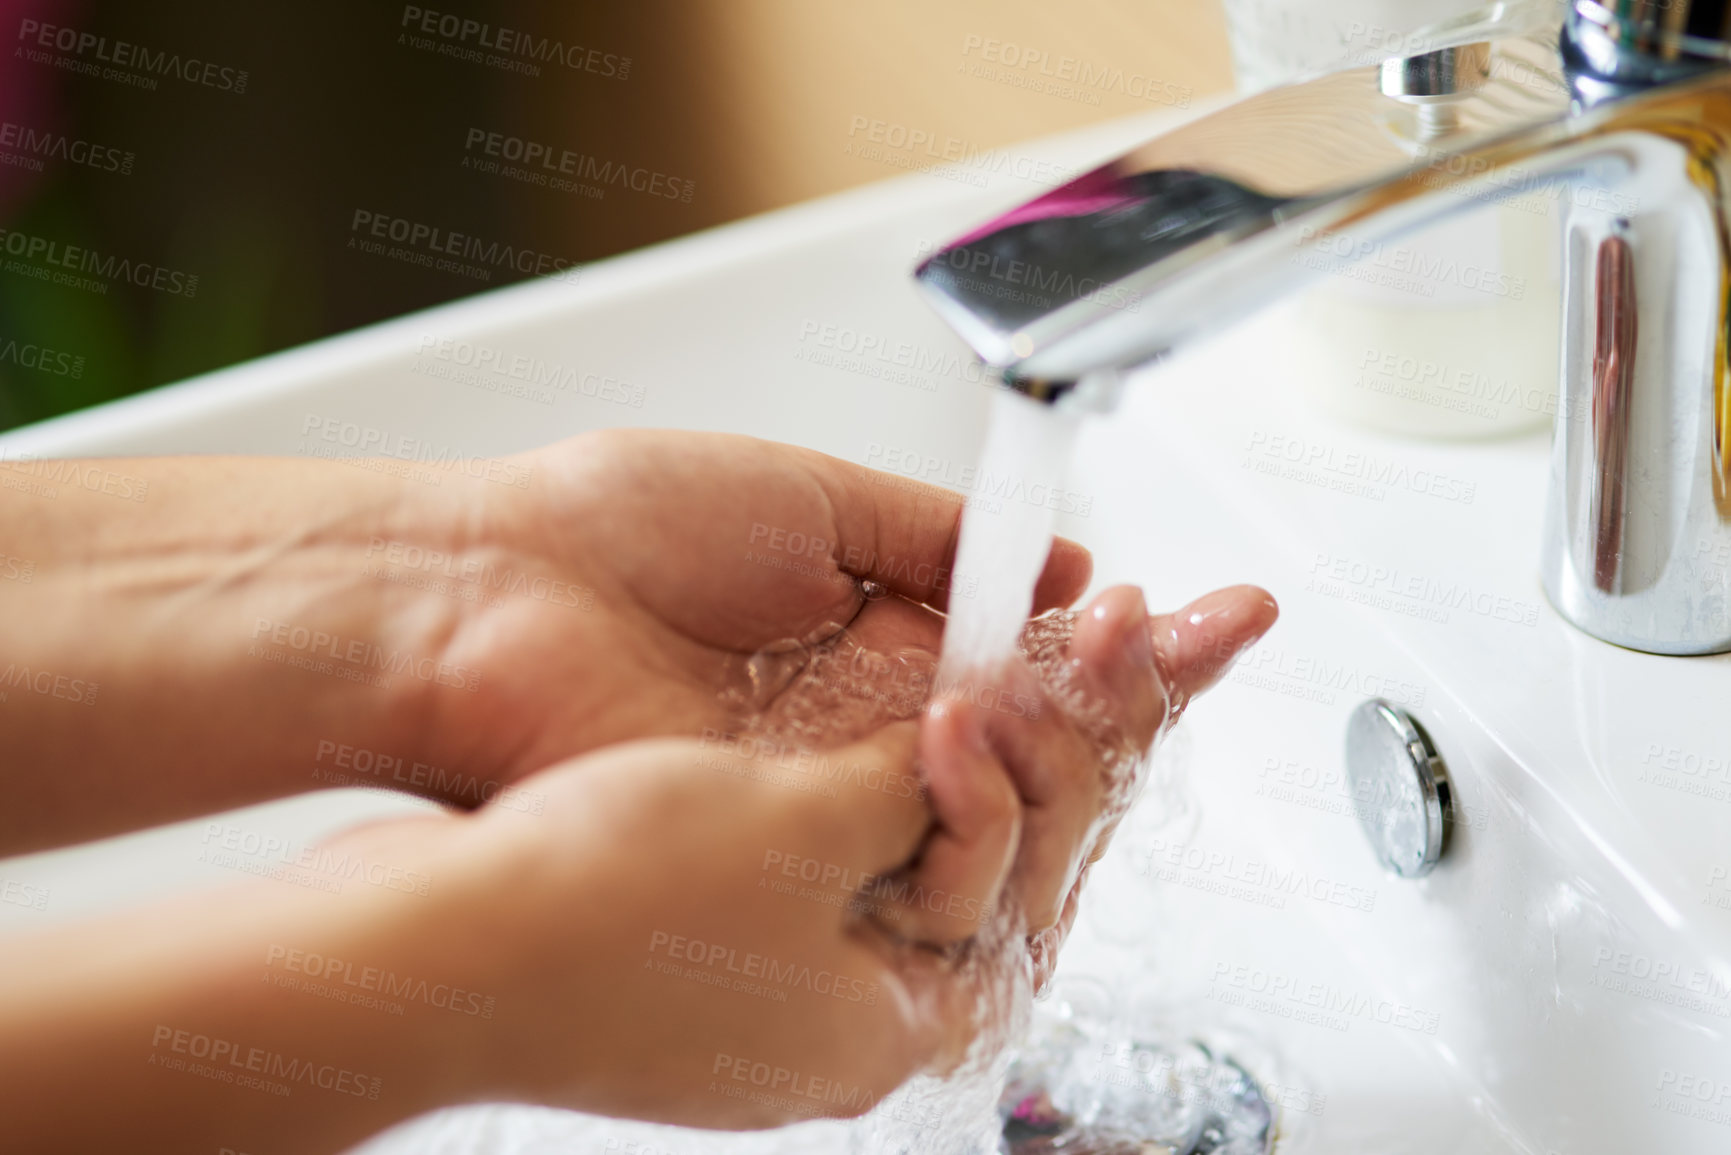 Buy stock photo Water, sink and person washing hands in house for cleaning, safety and hygiene at home. Splash, liquid and palm for prevention of dirt, bacteria or germs in bathroom with finger disinfection process